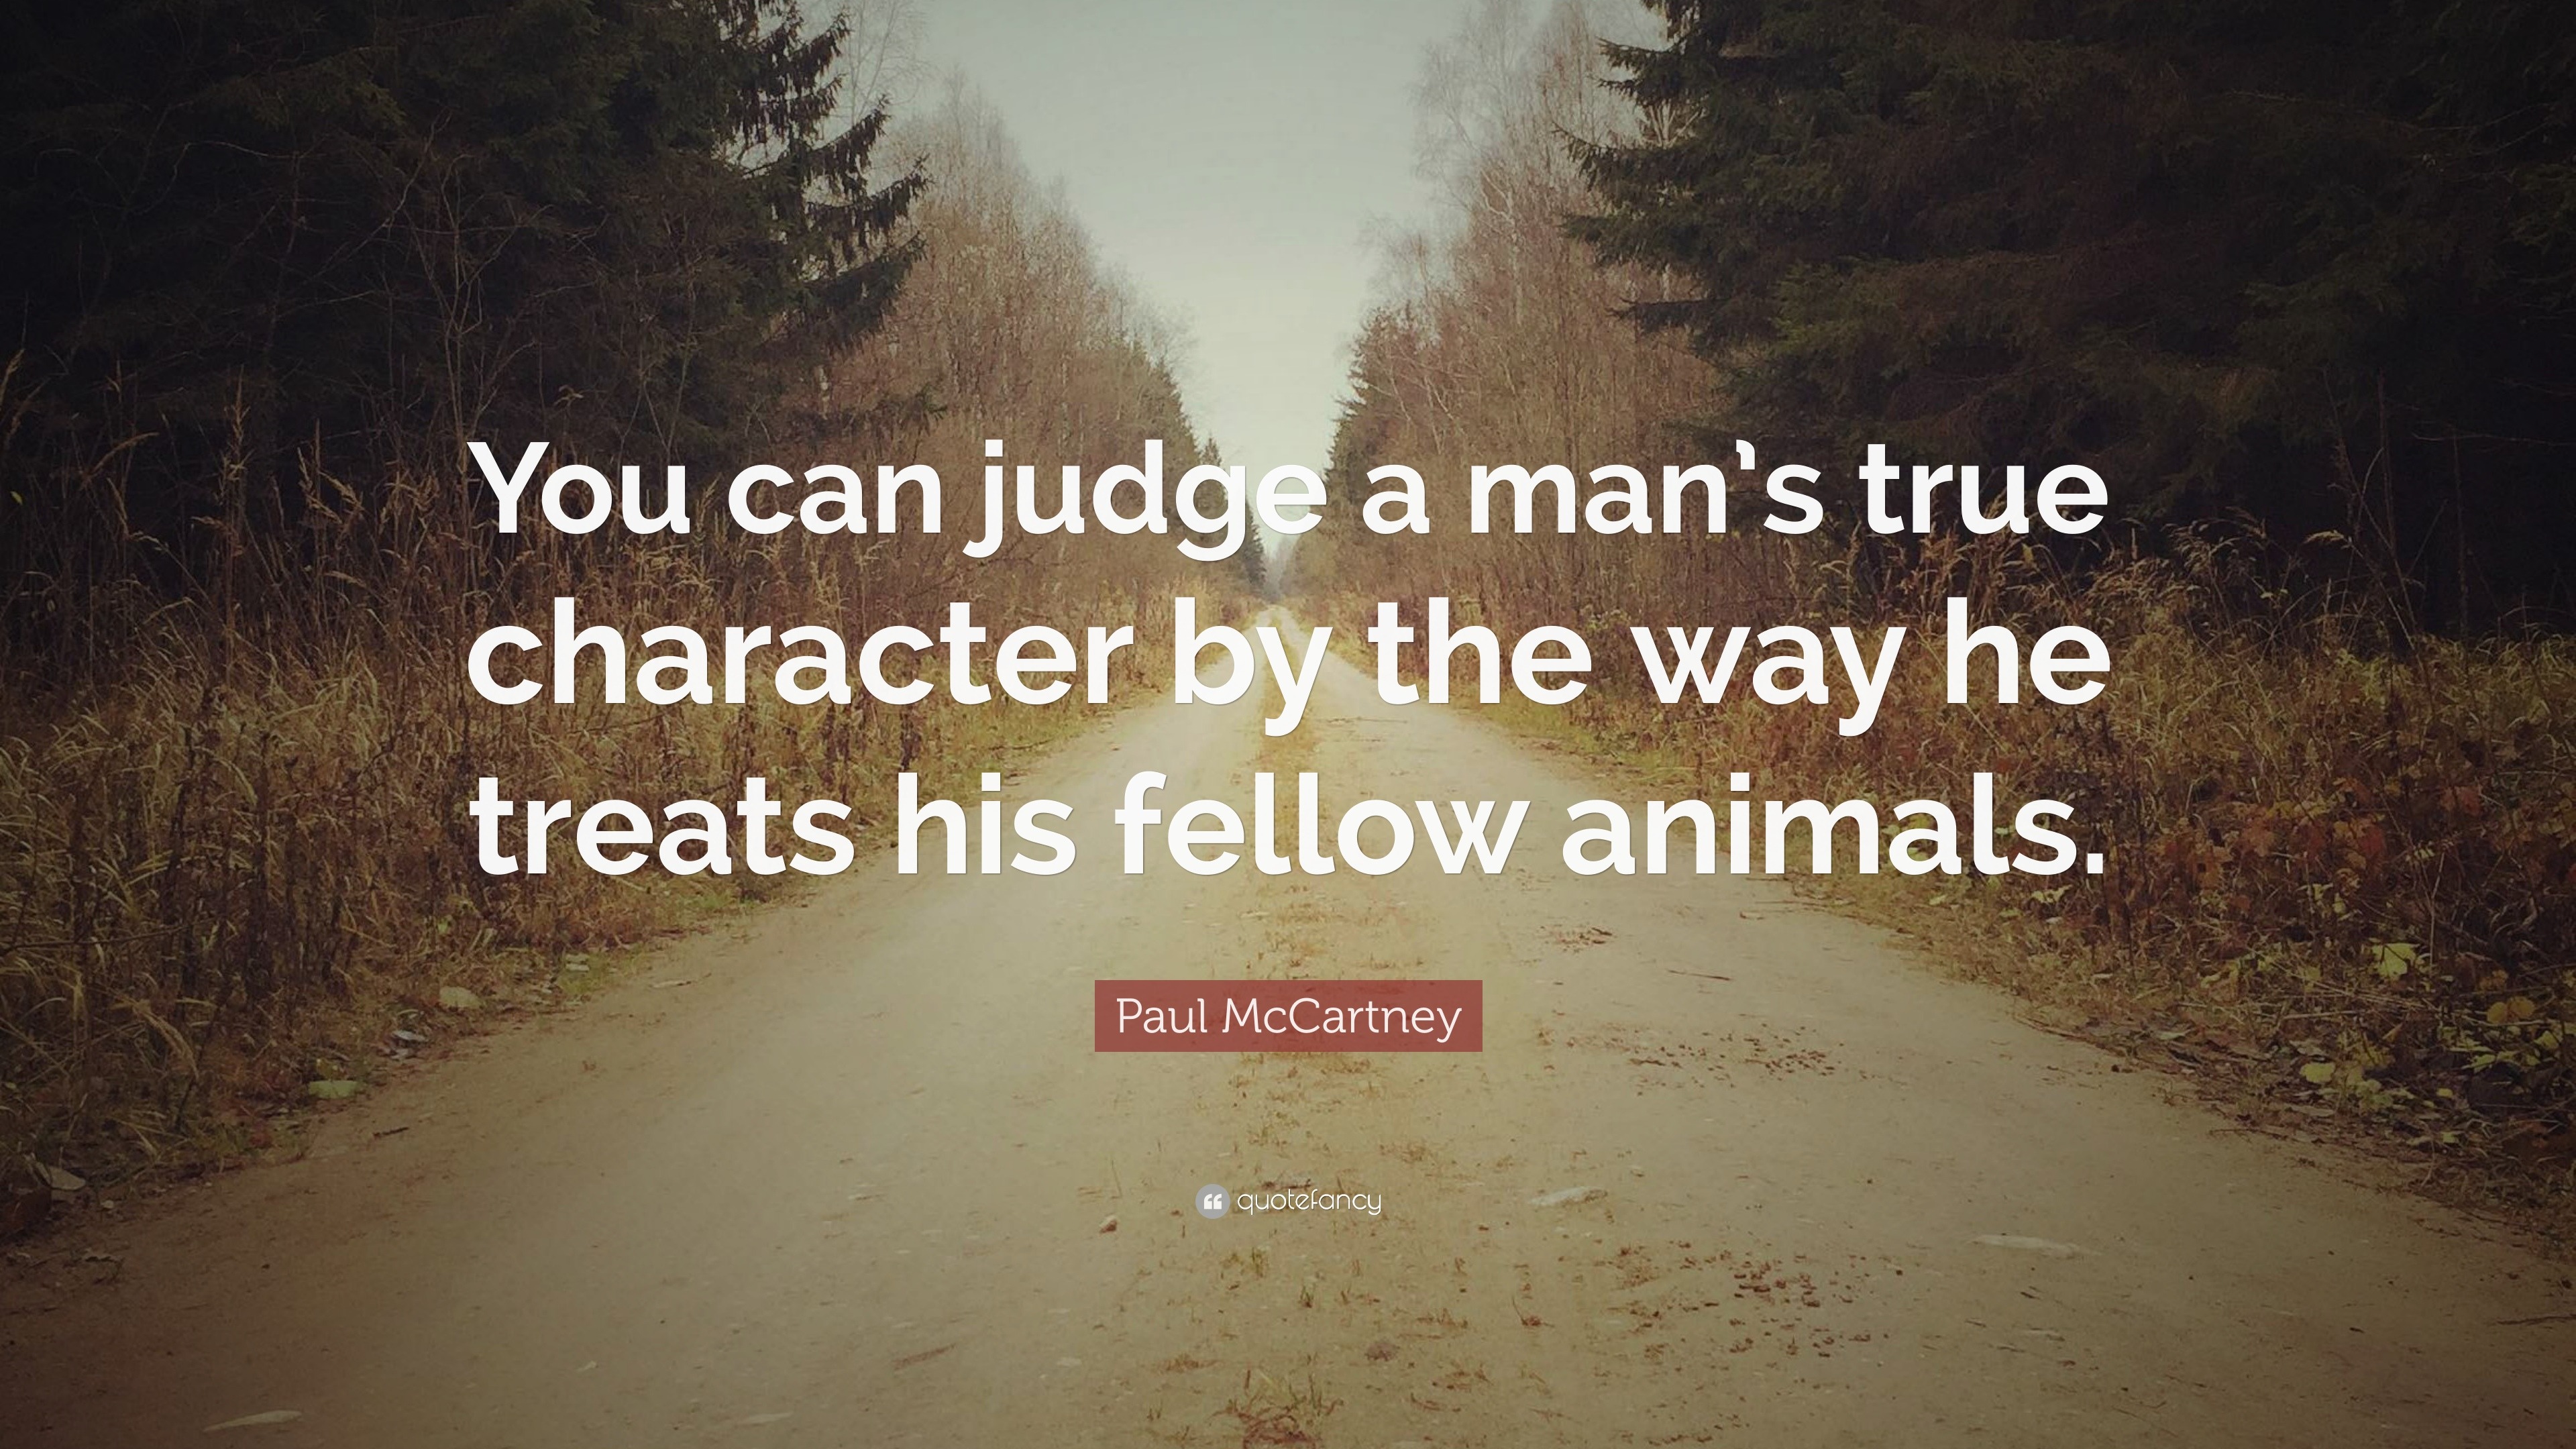 Paul McCartney Quote: “You can judge a man's true character by the way he  treats his